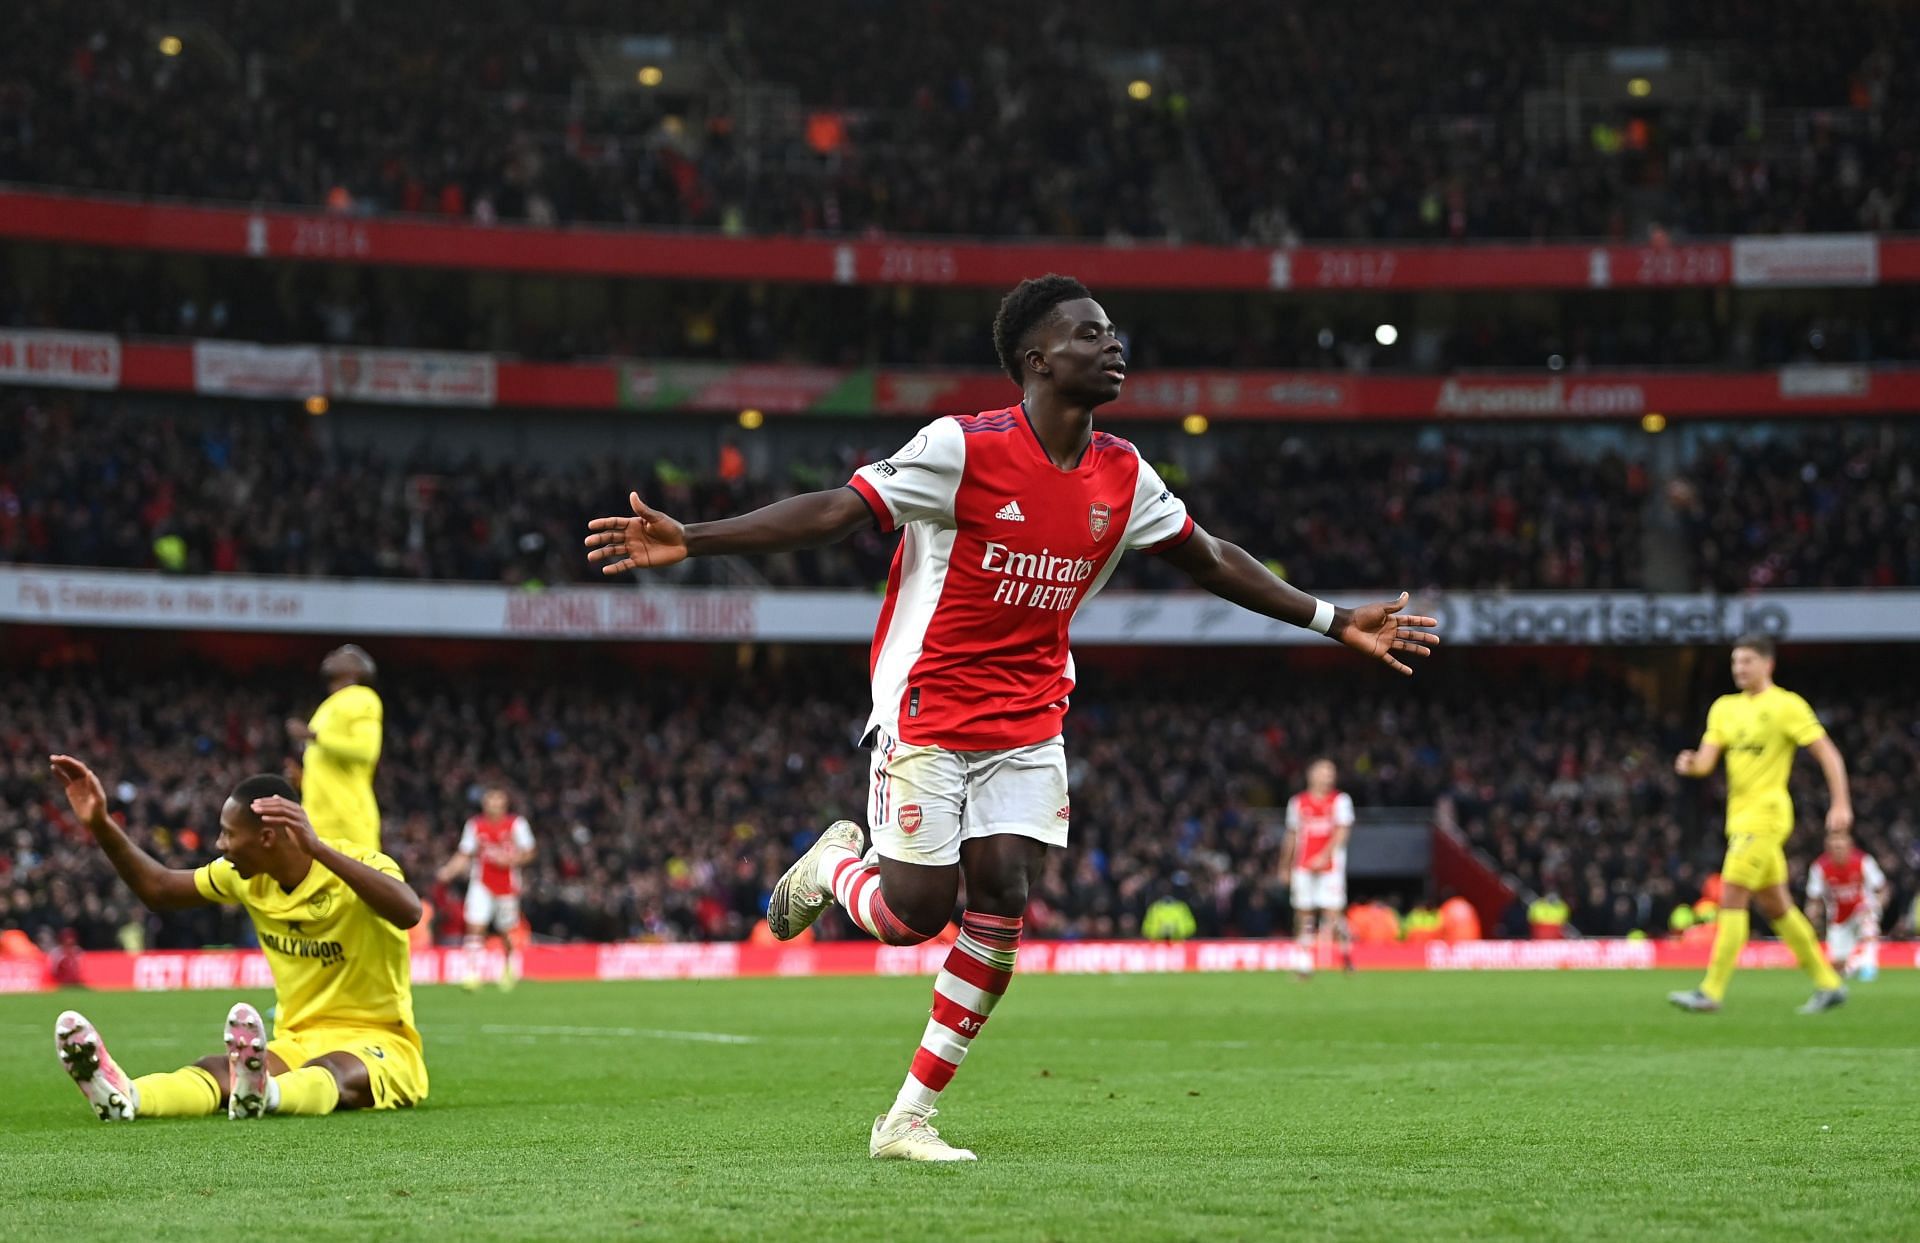 The Gunners came out on top in the reverse fixture against Brentford last season.